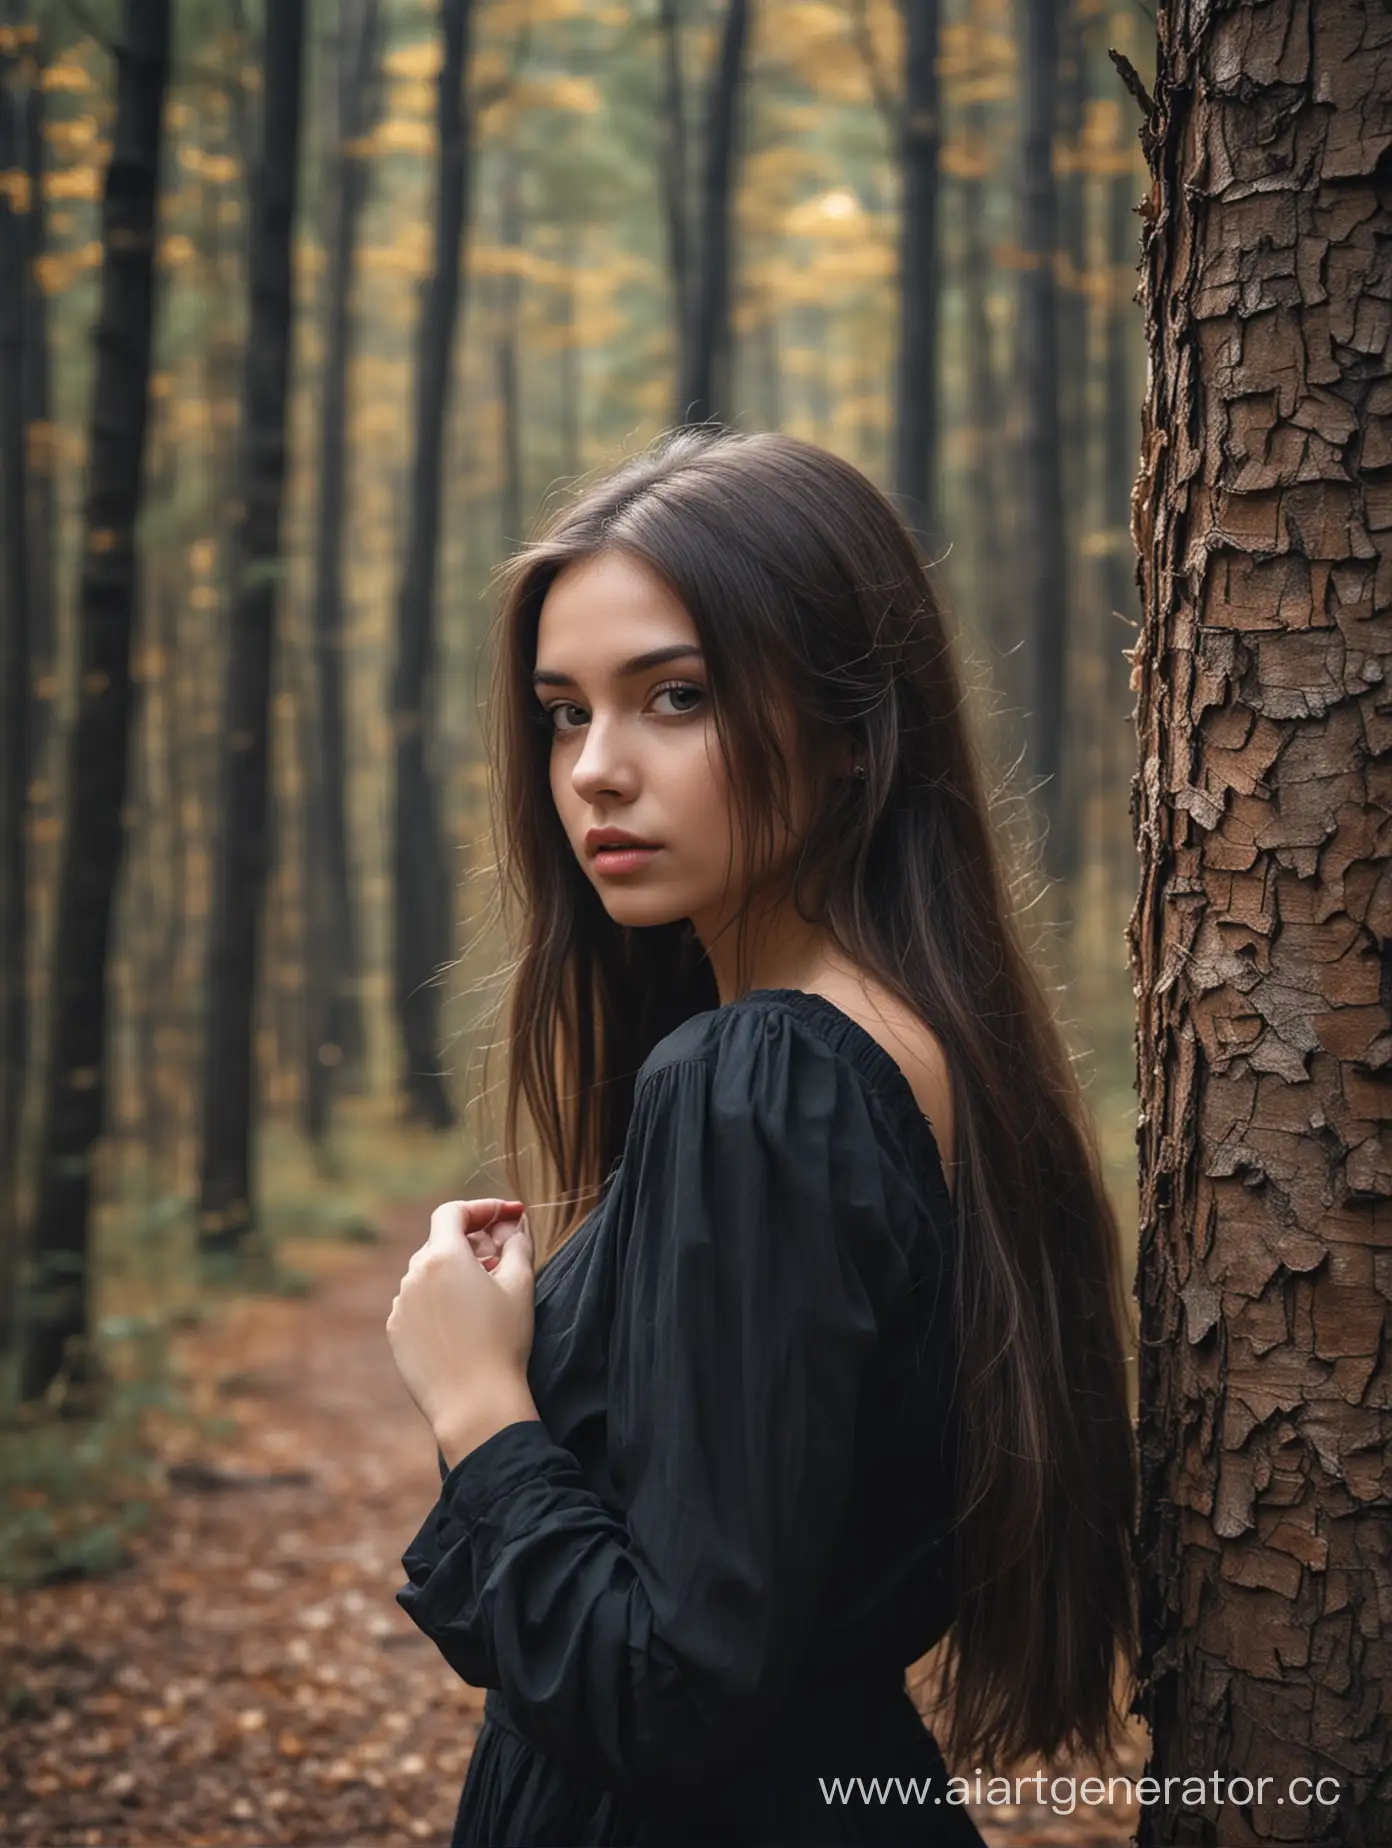 Enchanting-Forest-Portrait-Mysterious-Girl-Captured-in-Stunning-Photography